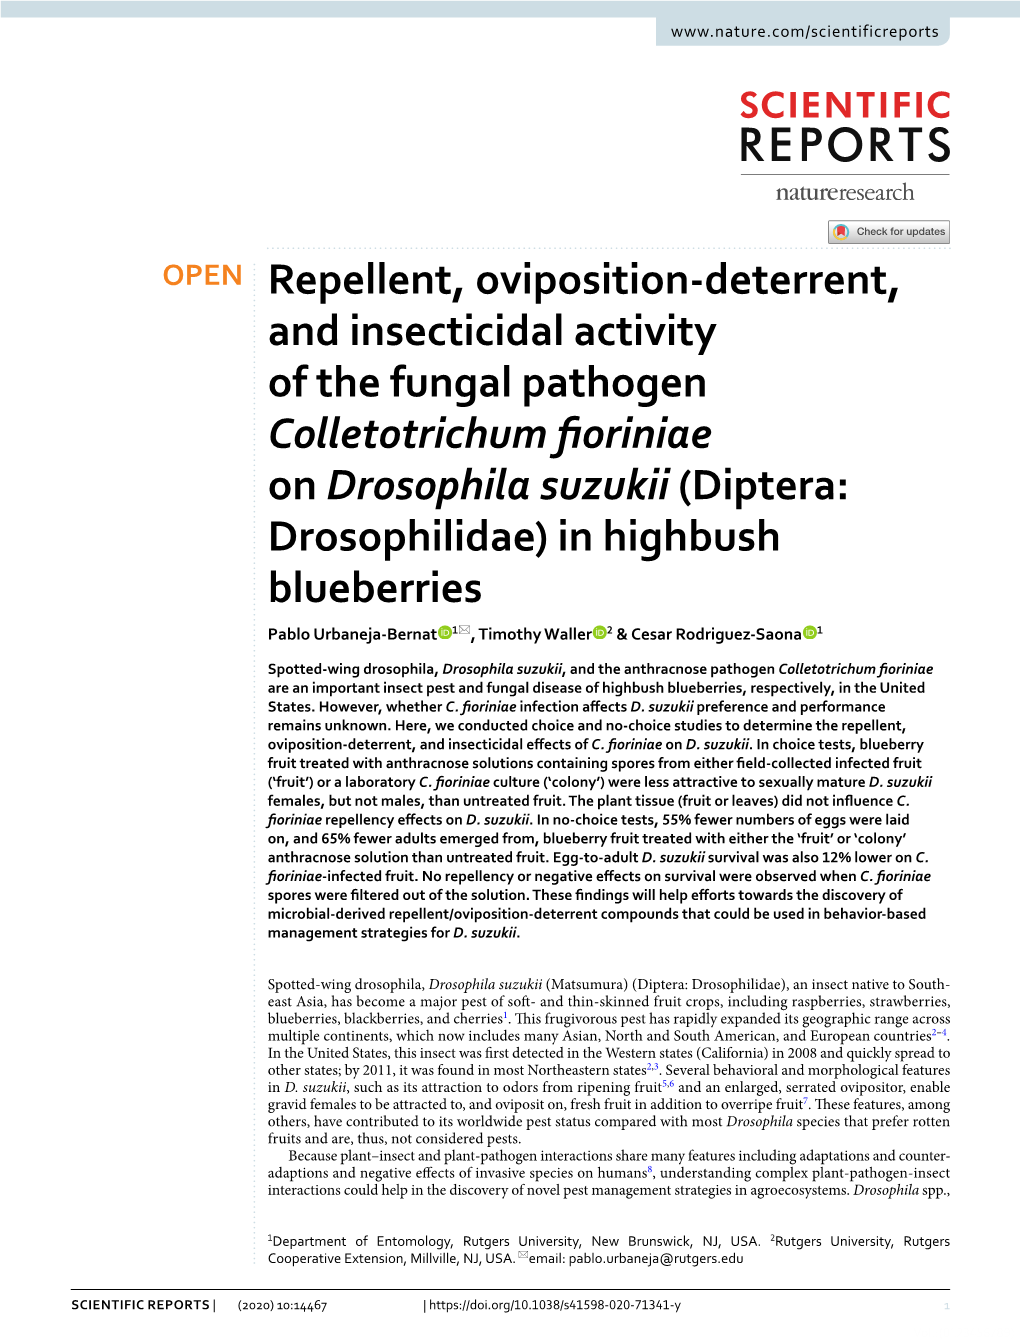 Repellent, Oviposition-Deterrent, and Insecticidal Activity of the Fungal